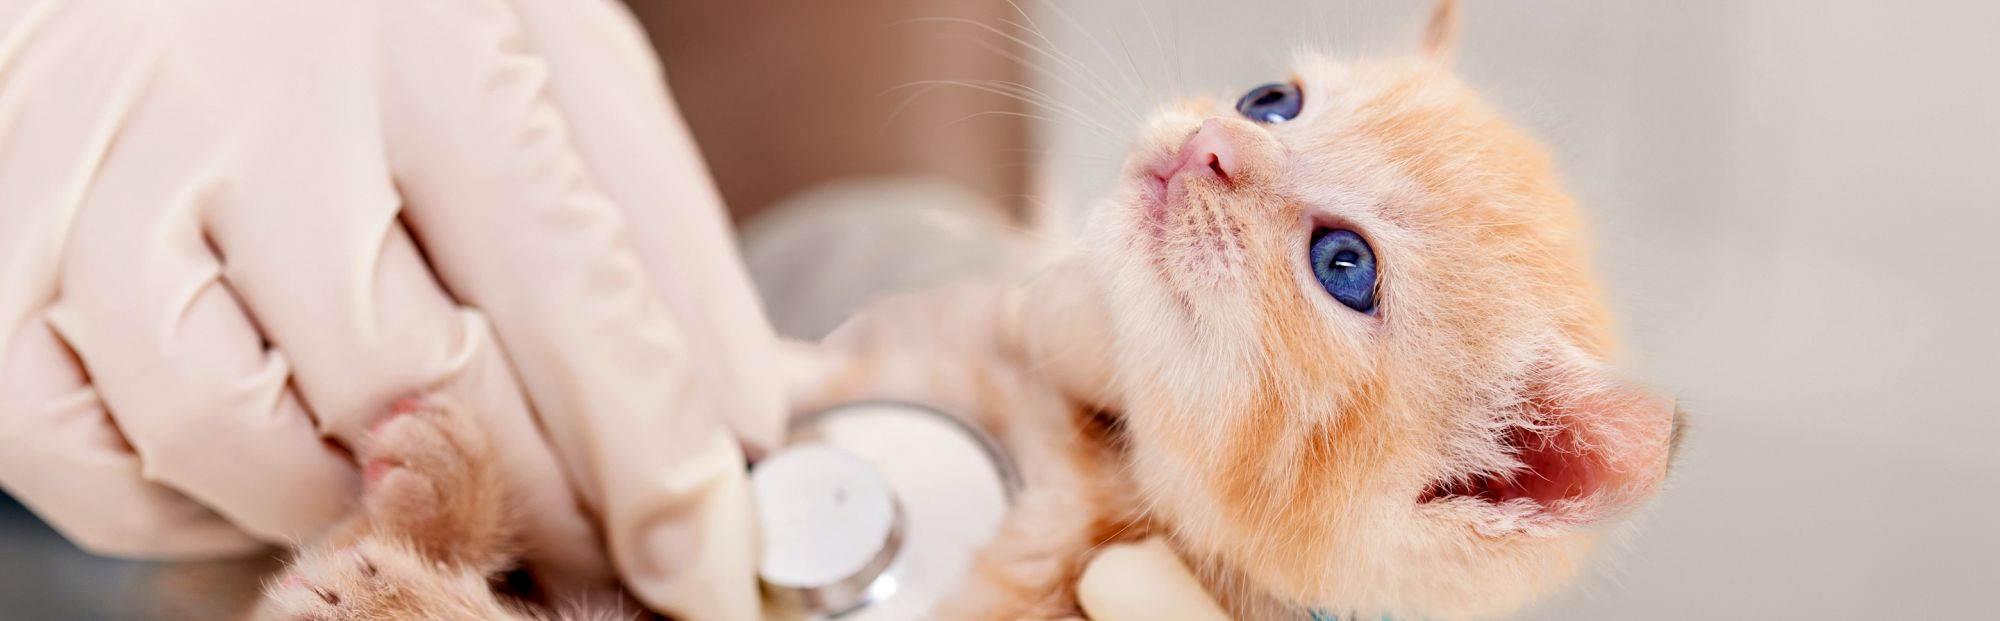 Ginger kitten in a veterinary clinic being examined